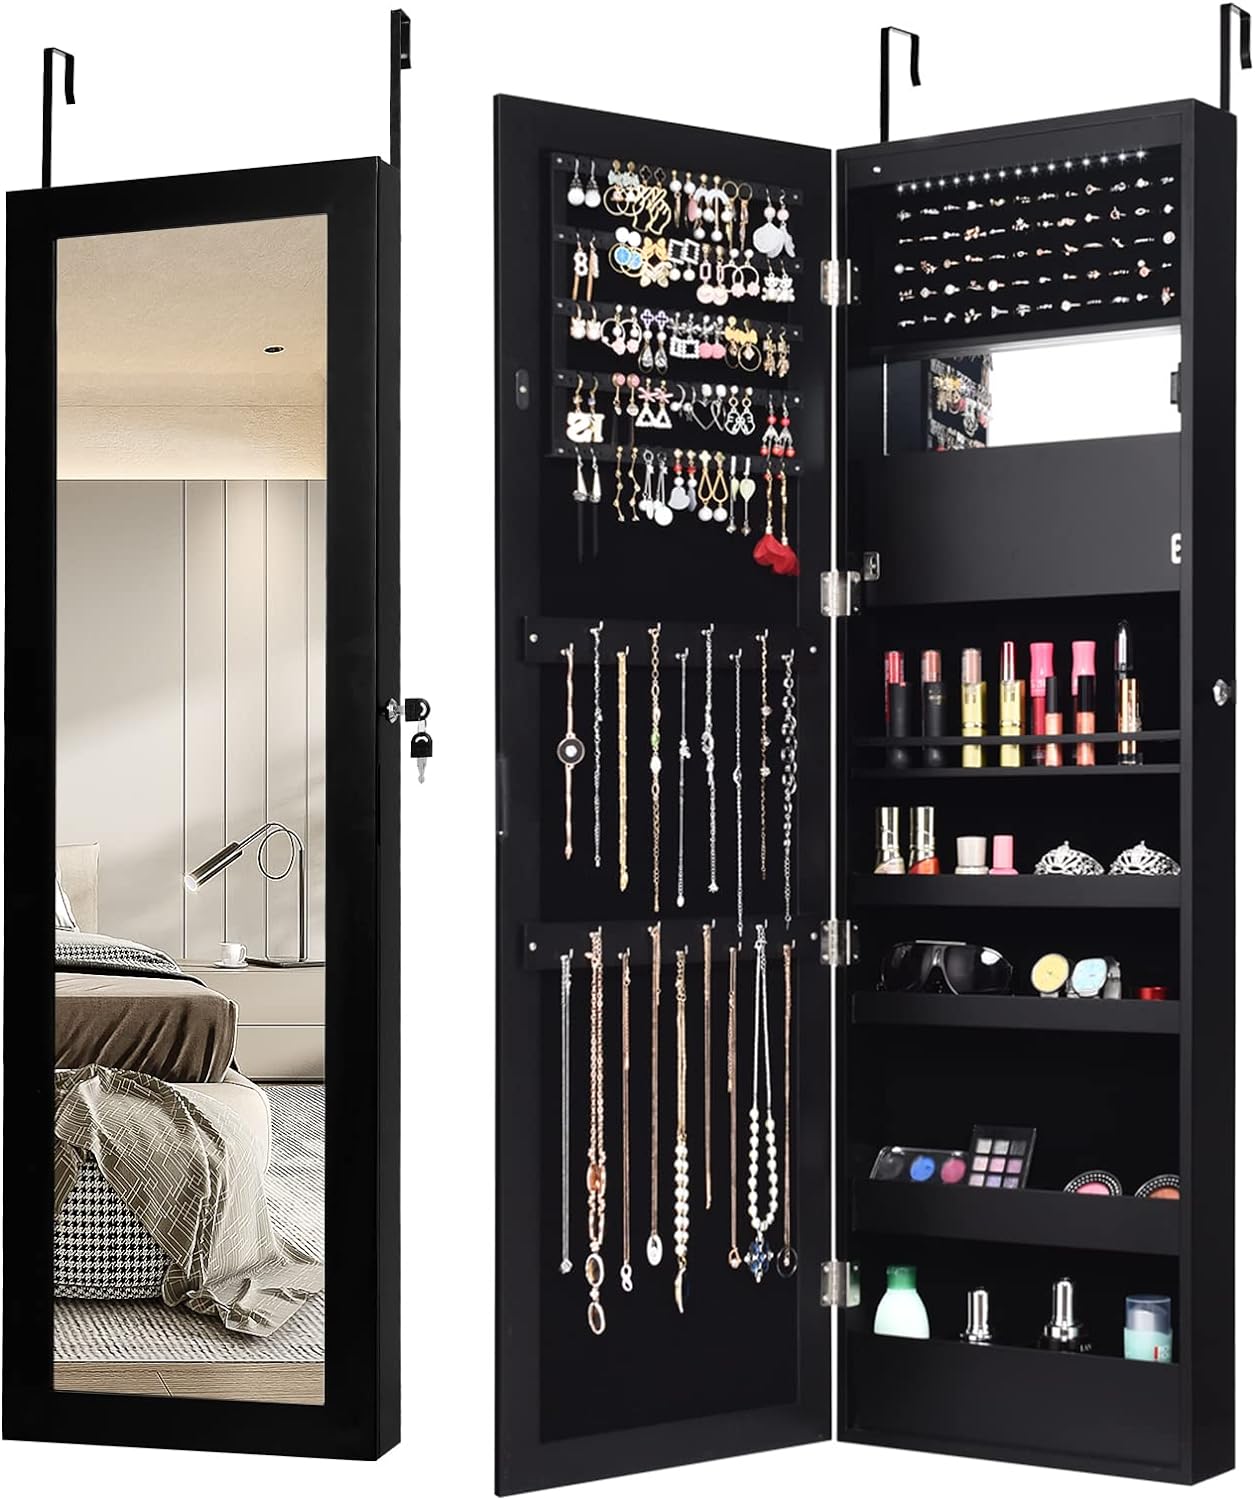 COSTWAY 12 LEDs Mirror Jewelry Cabinet, Wall/Door Mounted Jewelry Organizer Cabinet with 53.5 Full Length Mirror & Large Storage Capacity, Lockable Jewelry Armoire for Women Girls (Black)